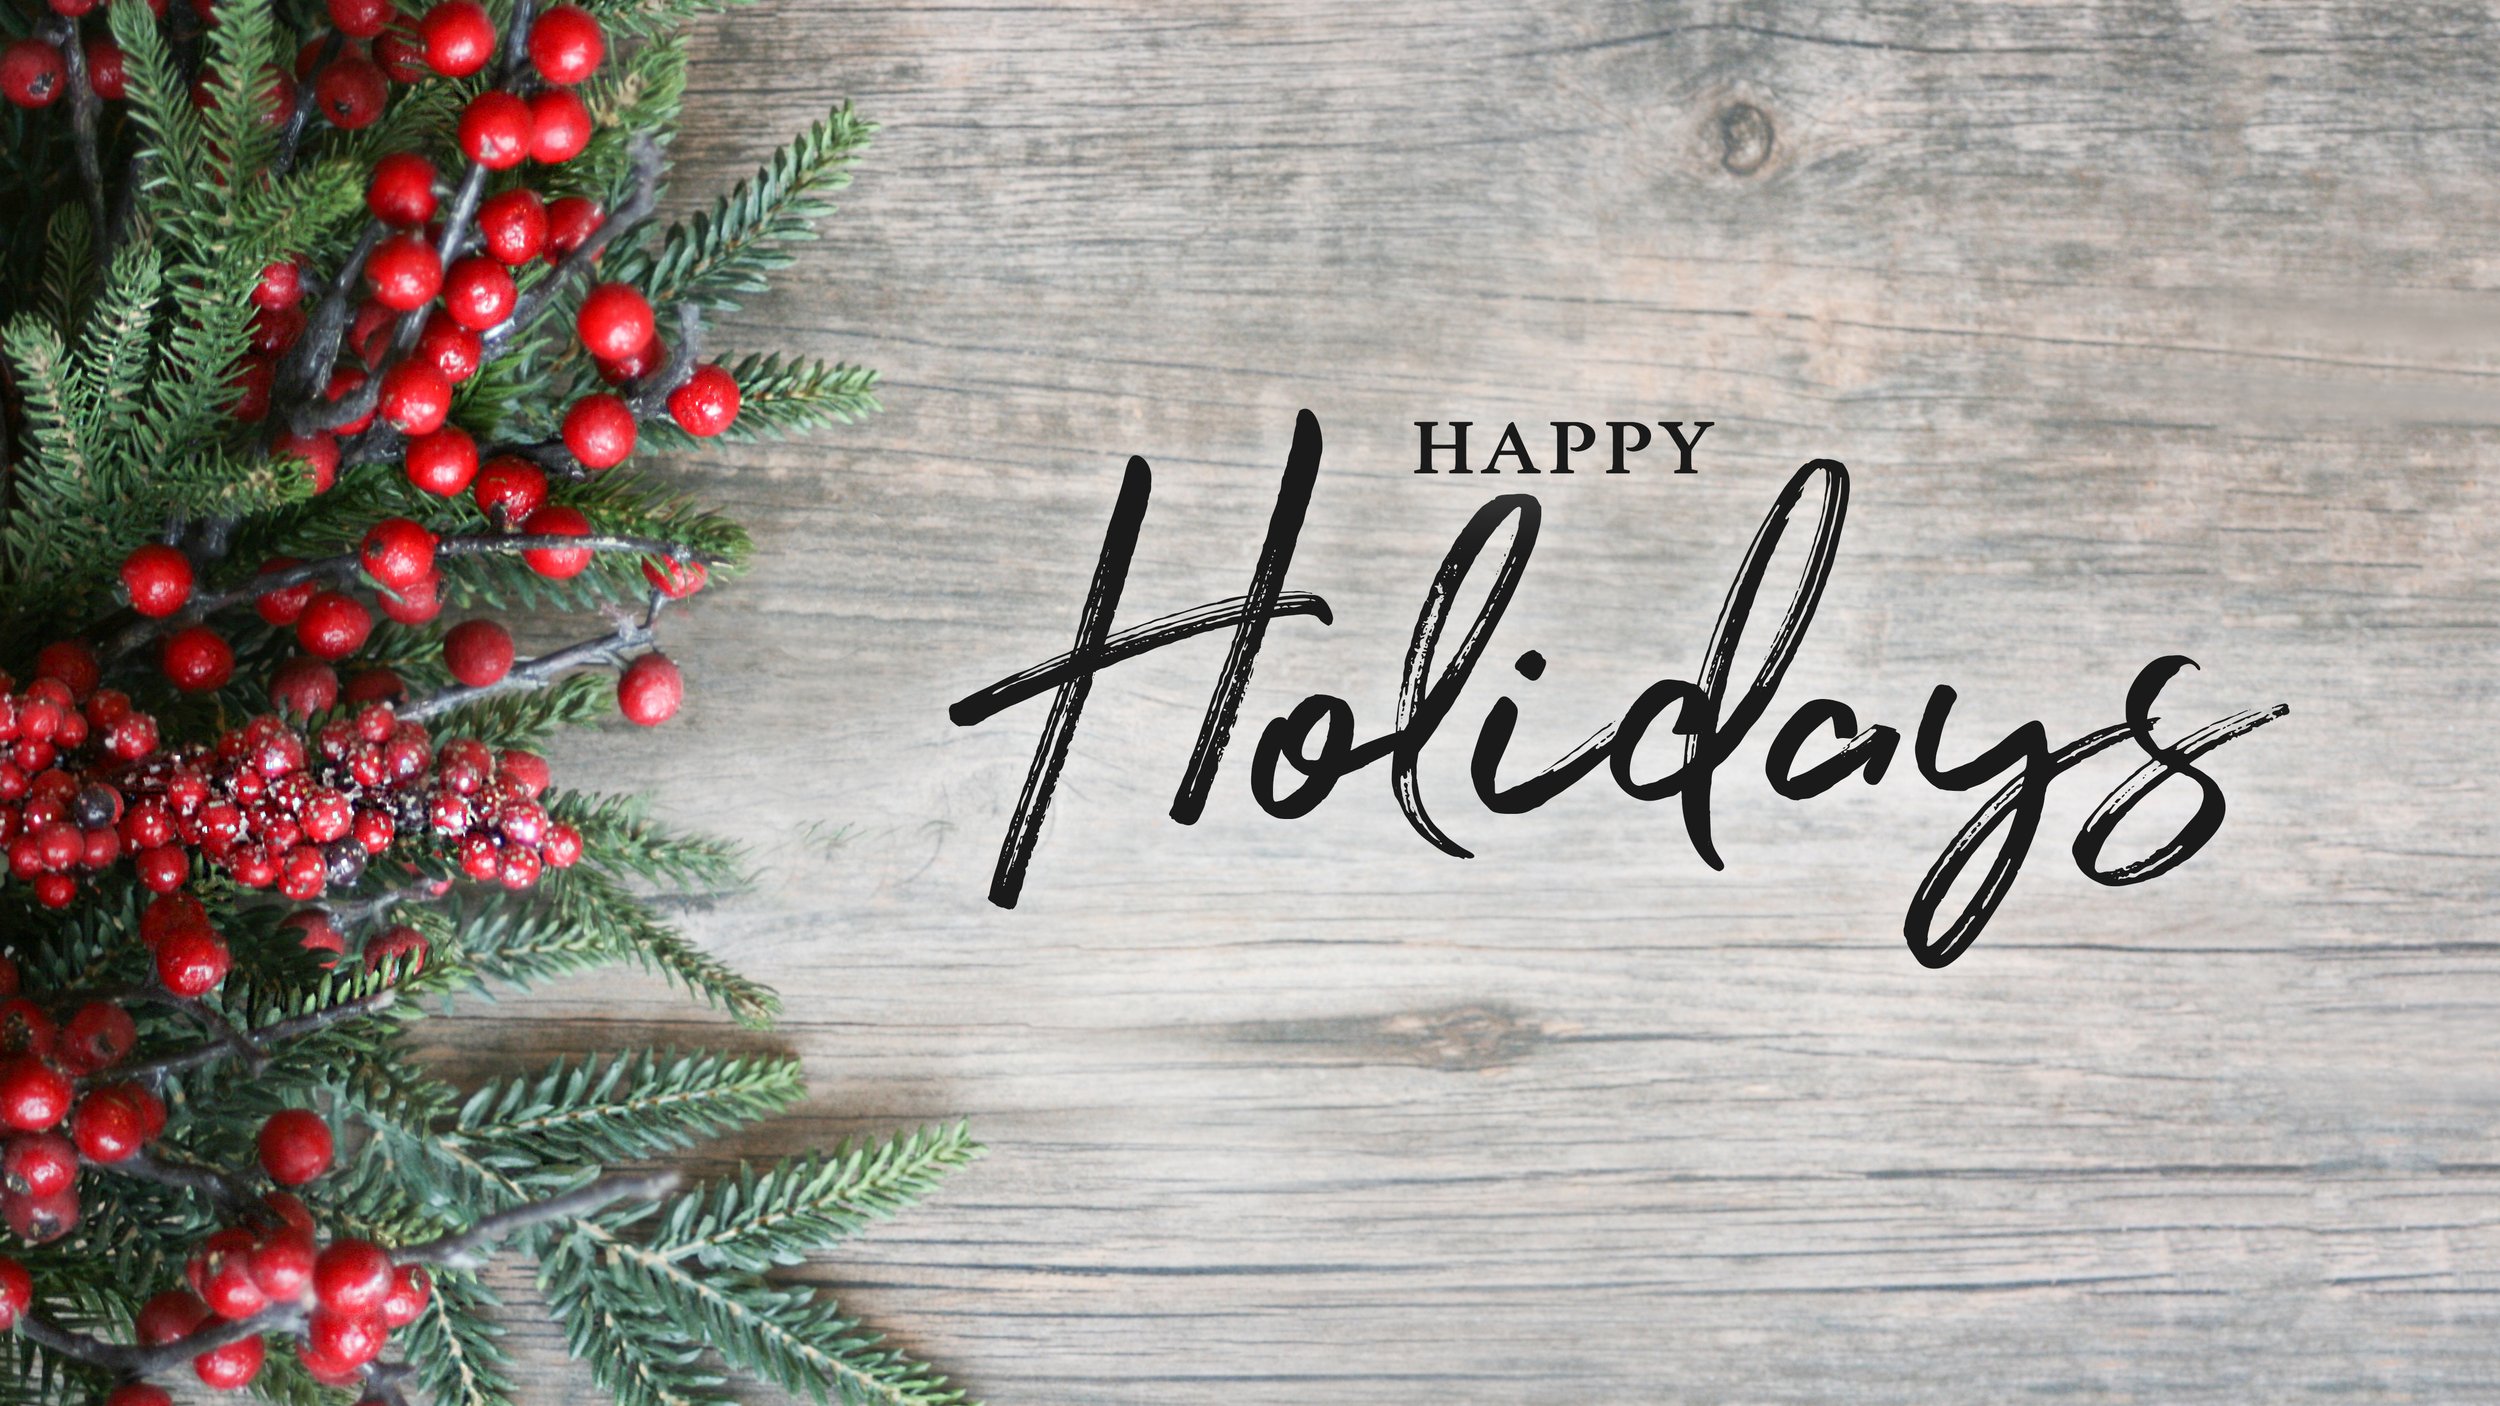 Happy holidays from SiteSeer!